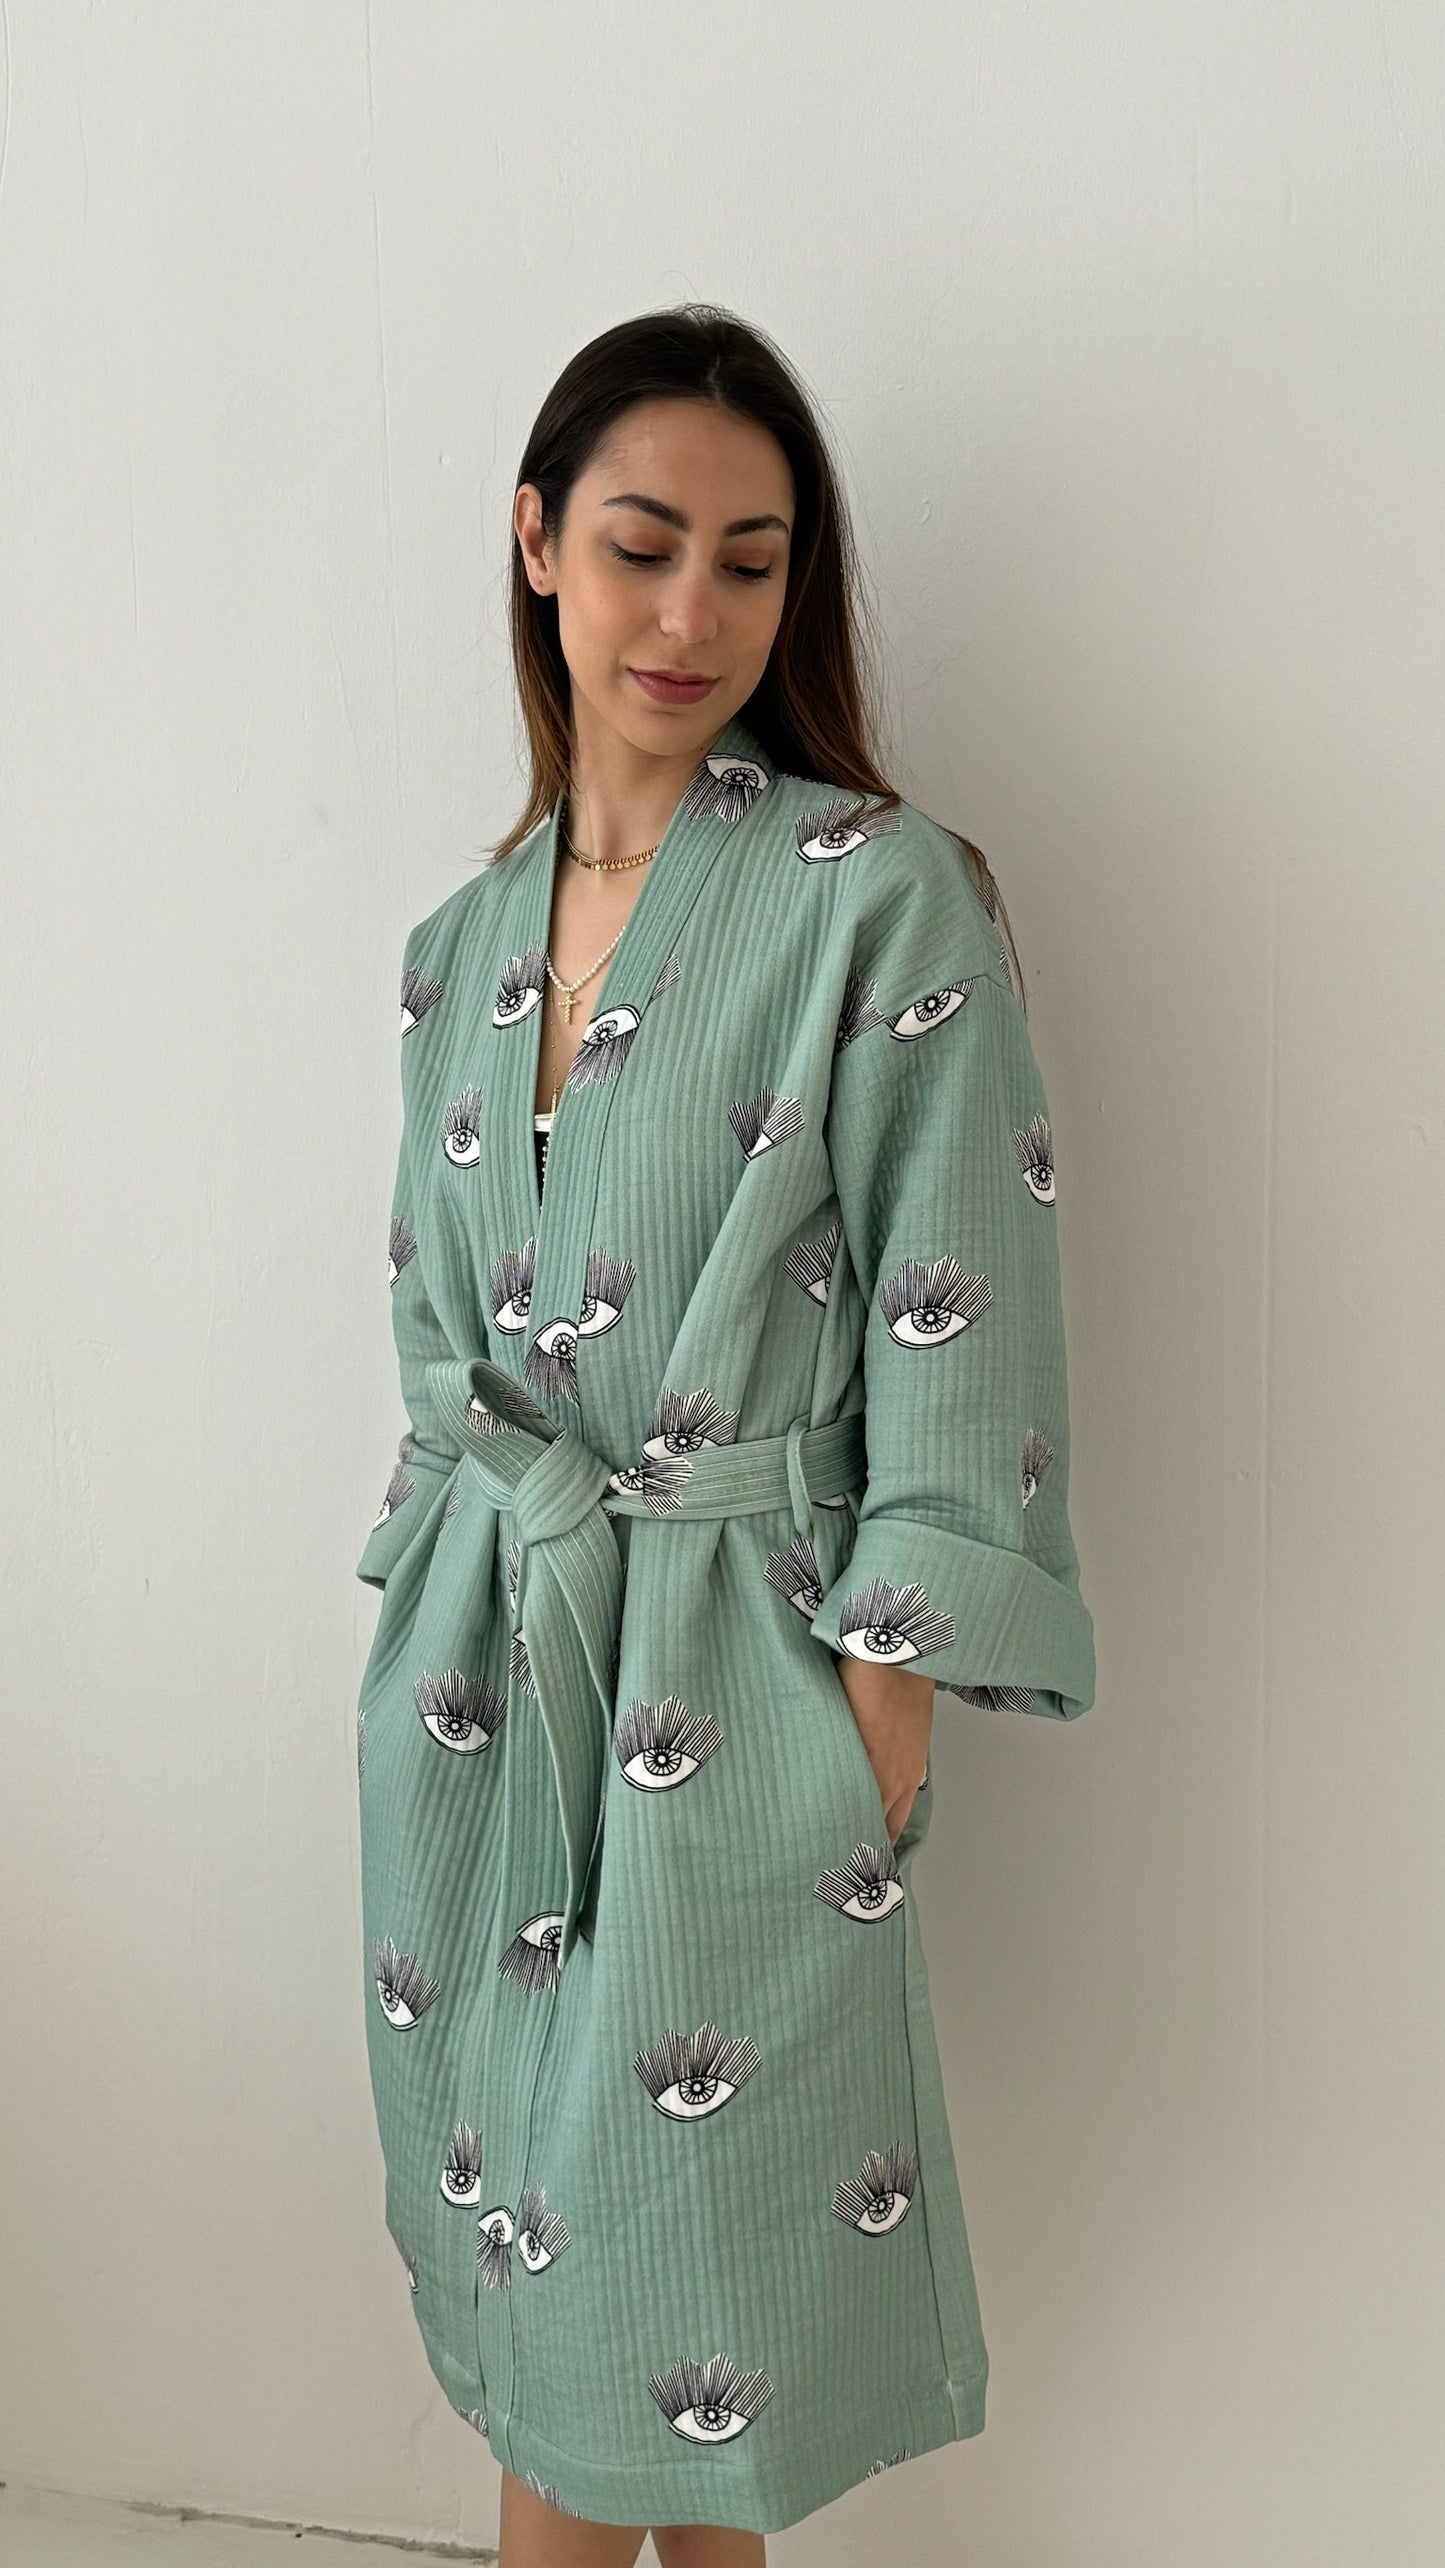 Evil Eye Kimono - Evil Eye Kimono - 100% cotton with evil eye pattern, can be used as a bath or home robe but also as a jacket to wear outside